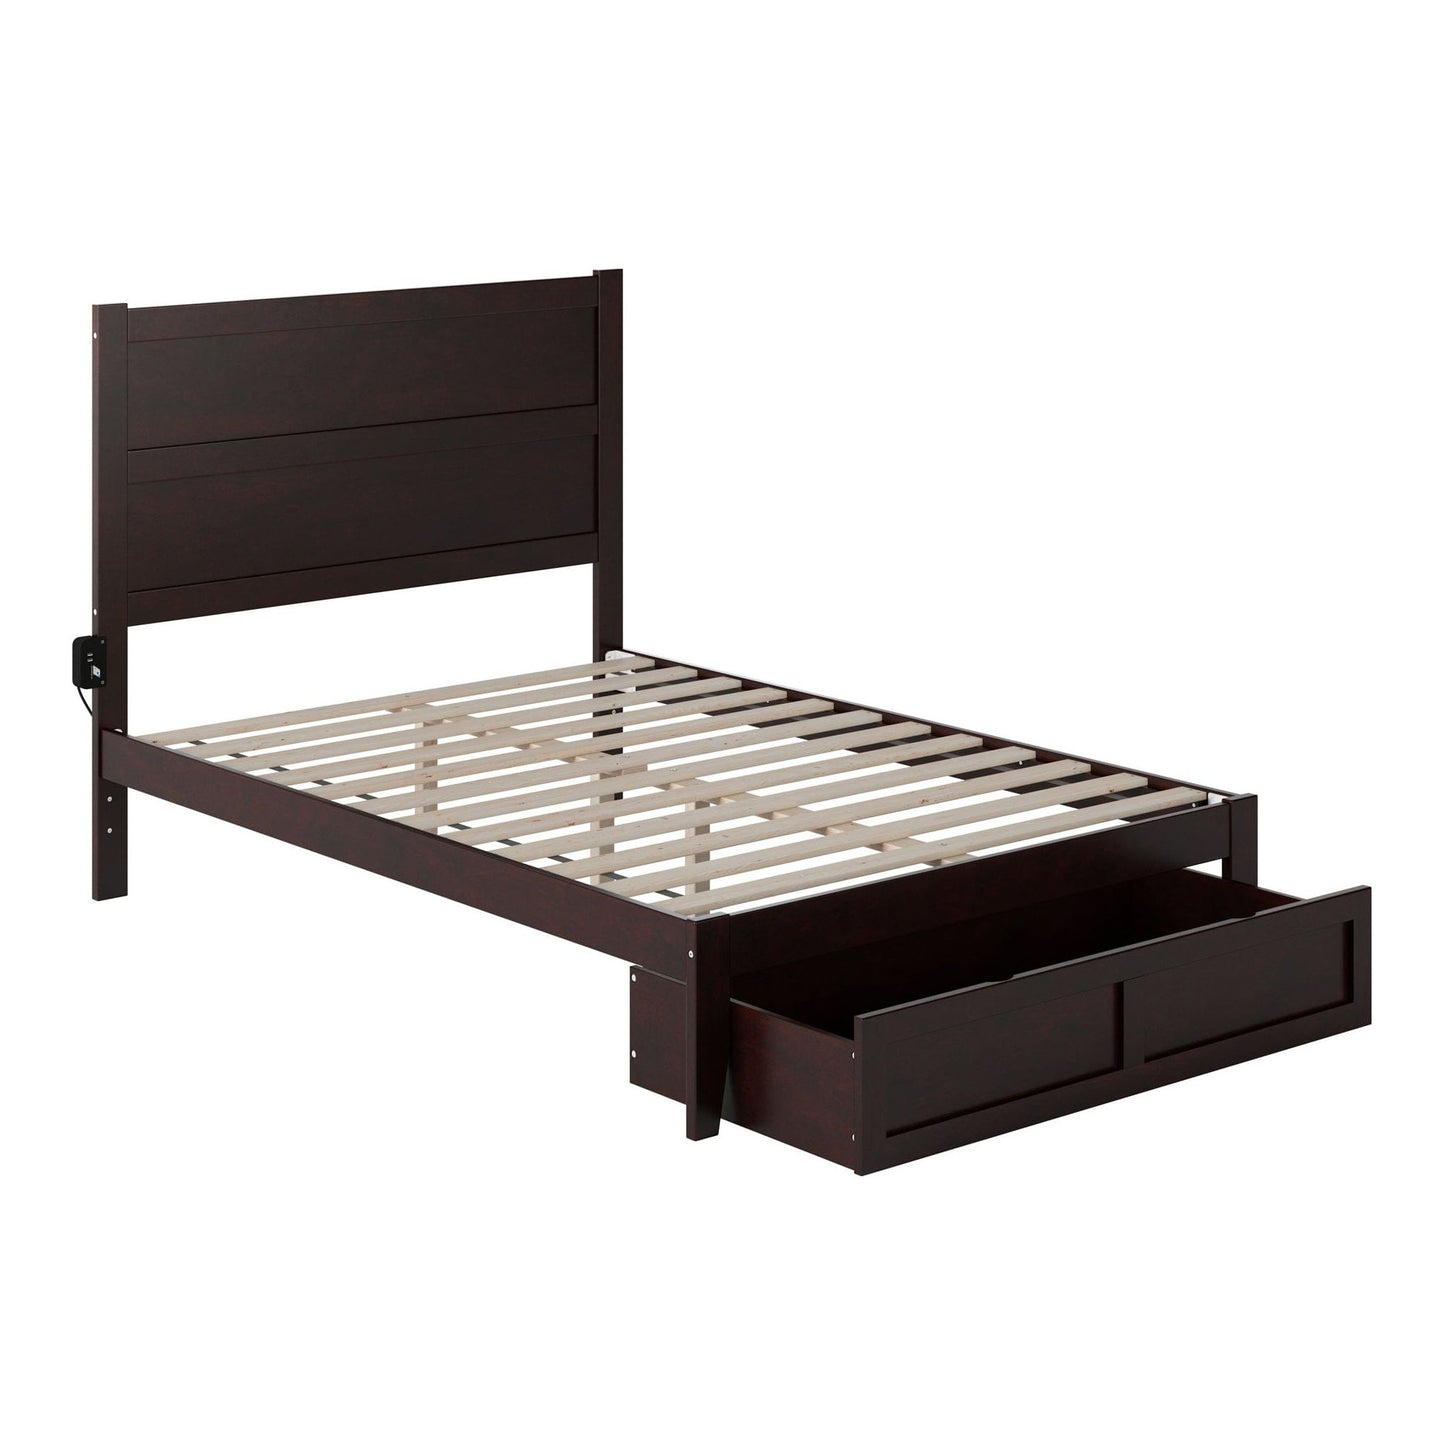 AFI Furnishings NoHo Full Bed with Foot Drawer in Espresso